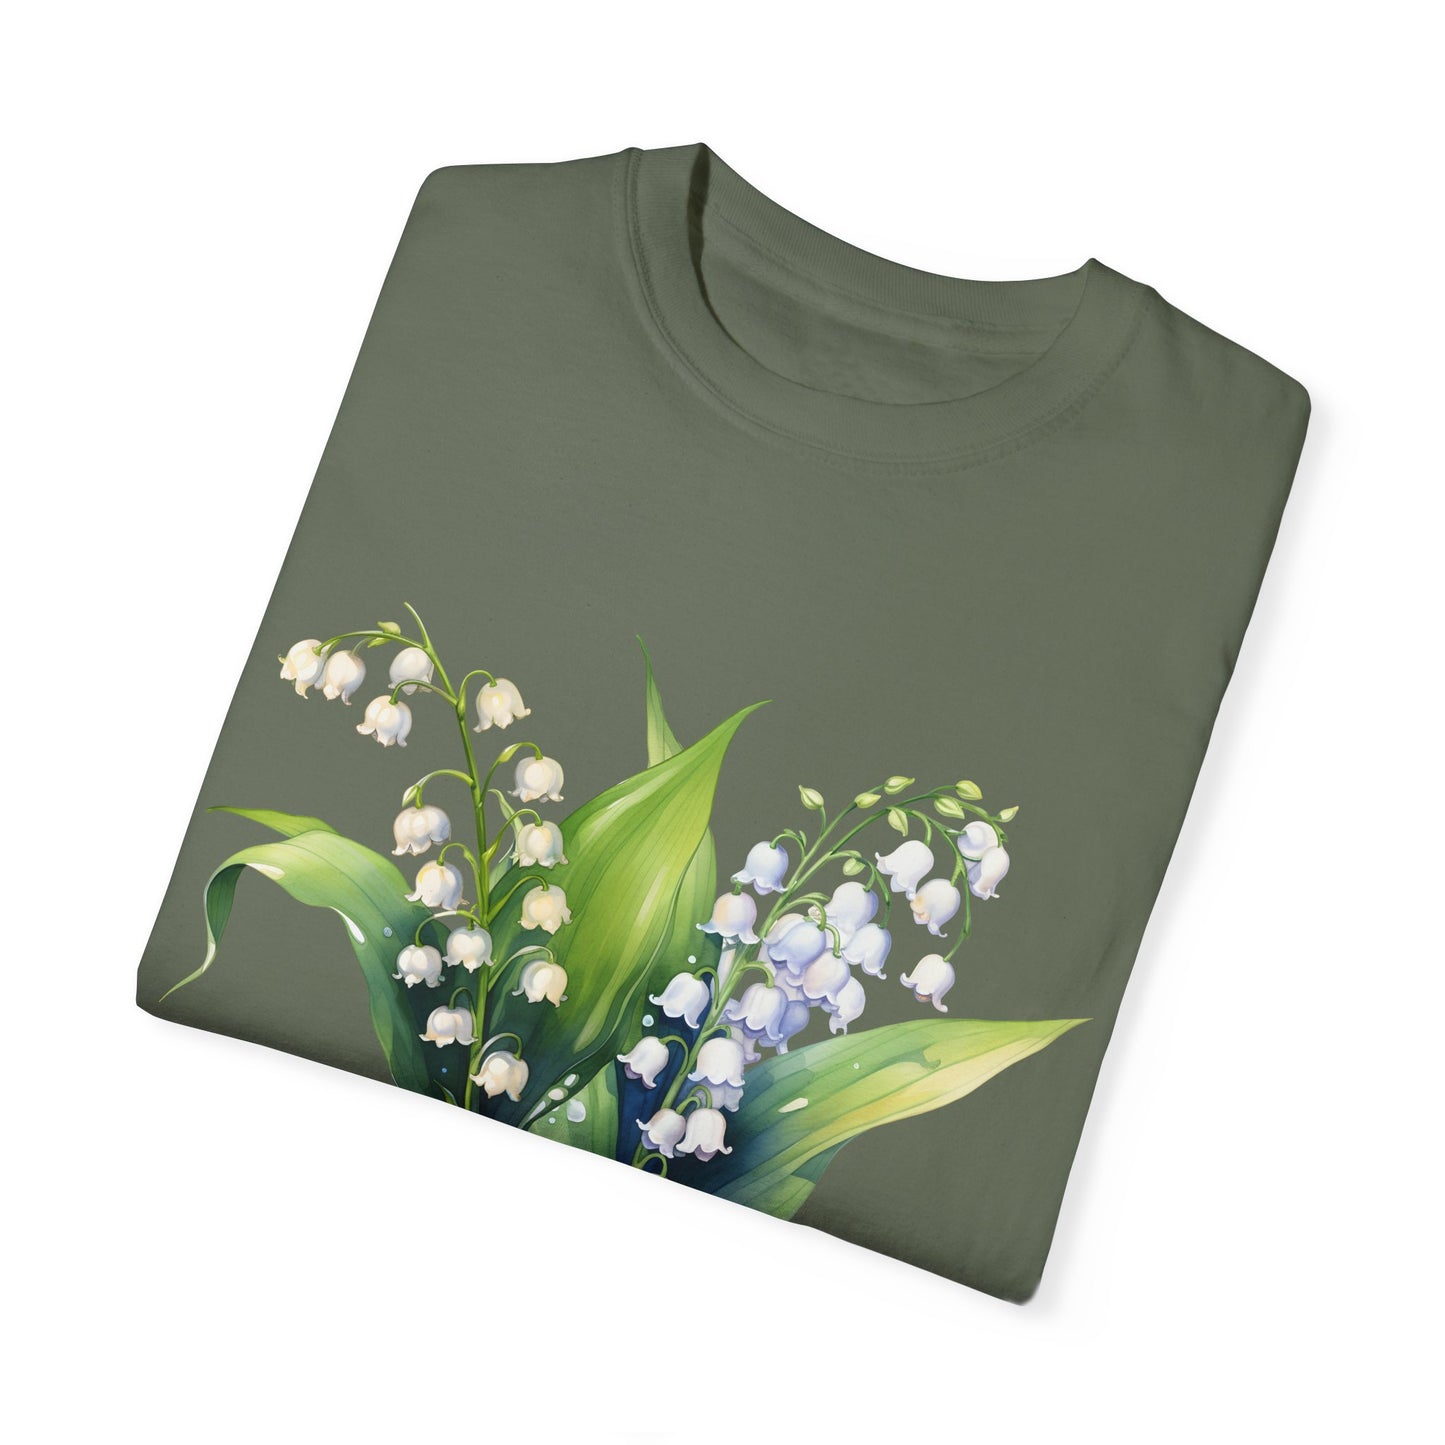 May Birth Flower "Lily of the Valley" (For Dark Fabric) - Unisex Garment-Dyed T-shirt